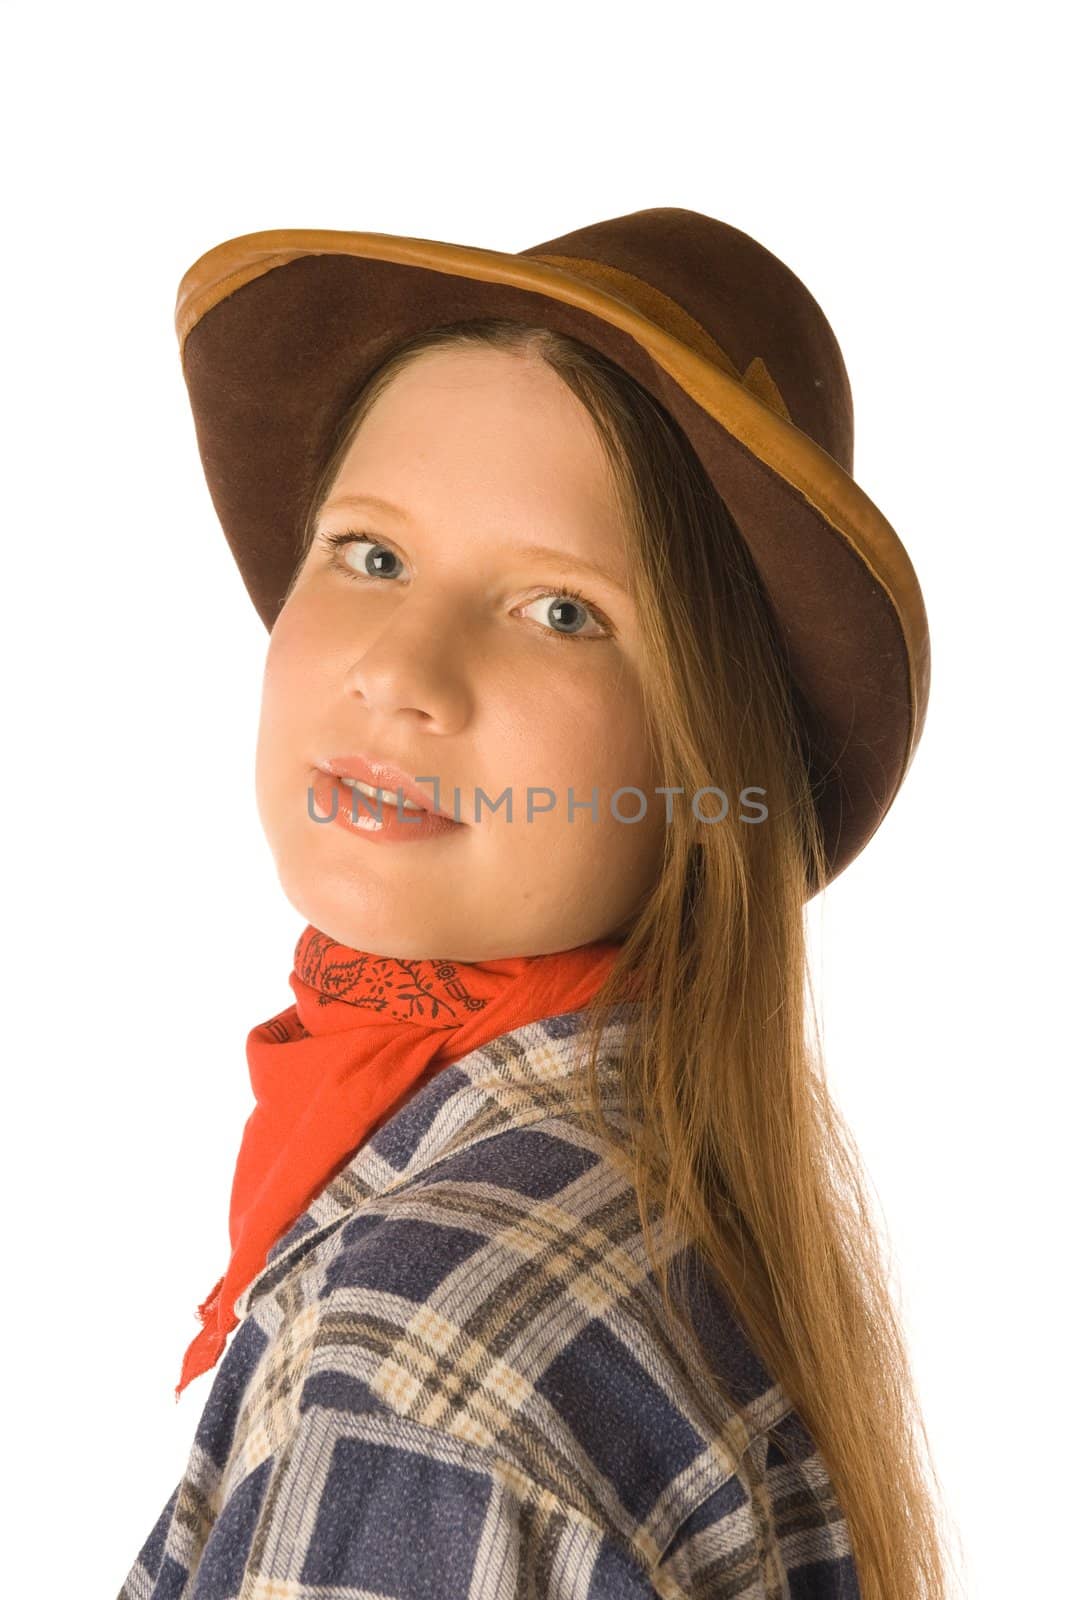 The portrait of a young woman wearing cowboy clothes